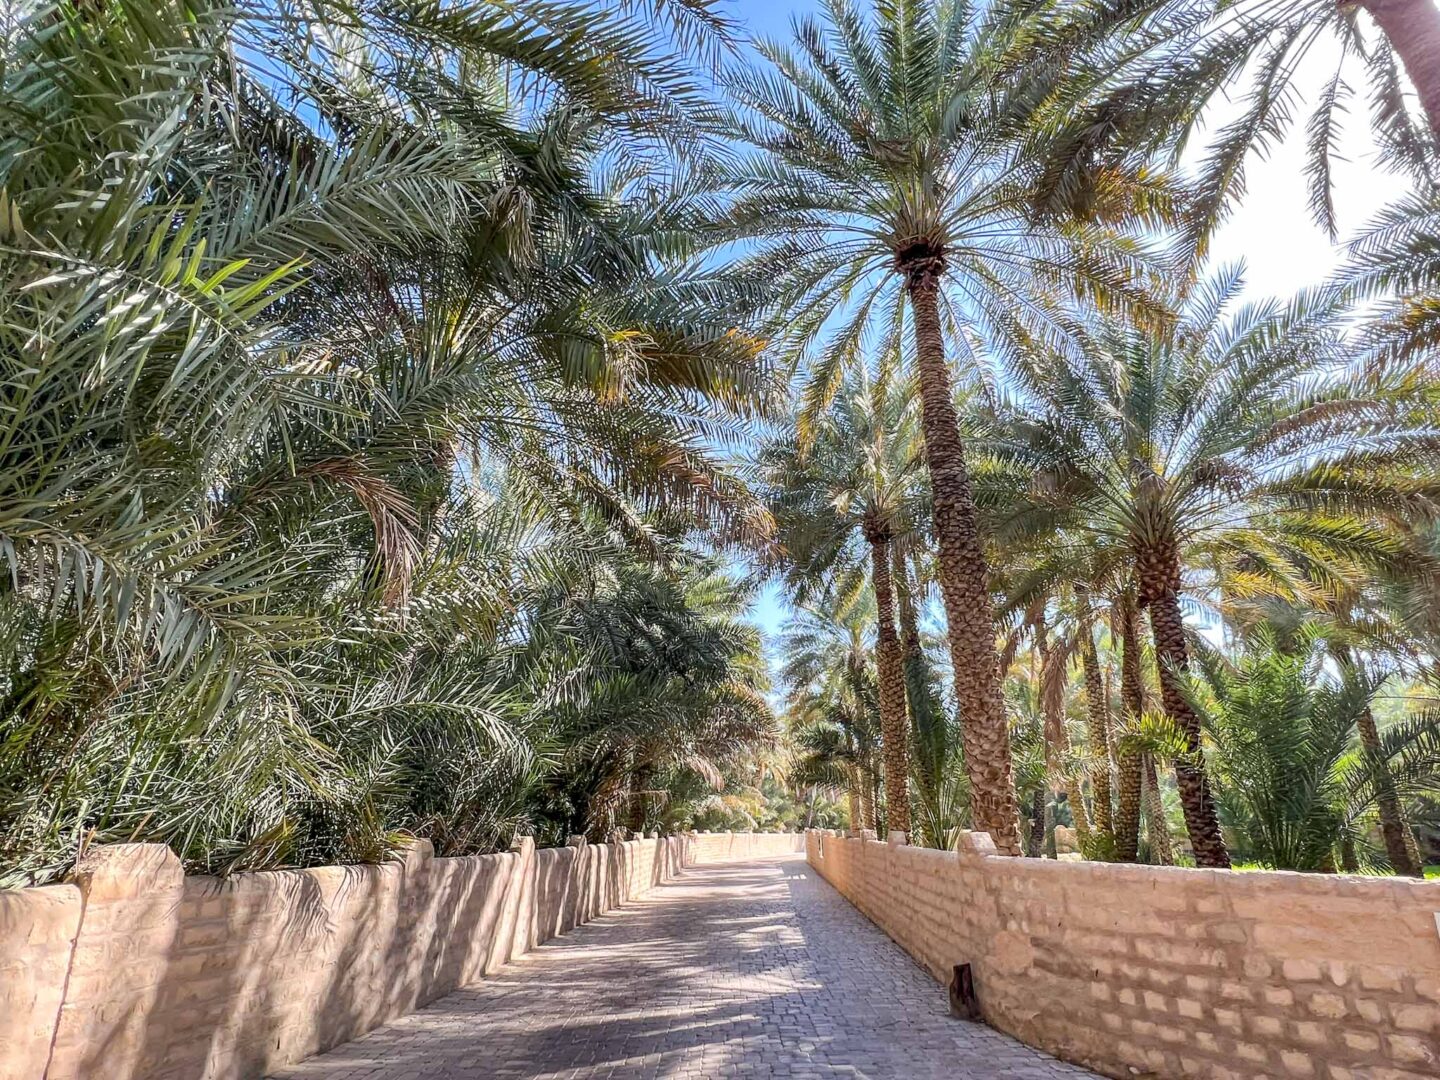 Things to do in Abu Dhabi, day trip to Al-Ain, Al-Ain Oasis